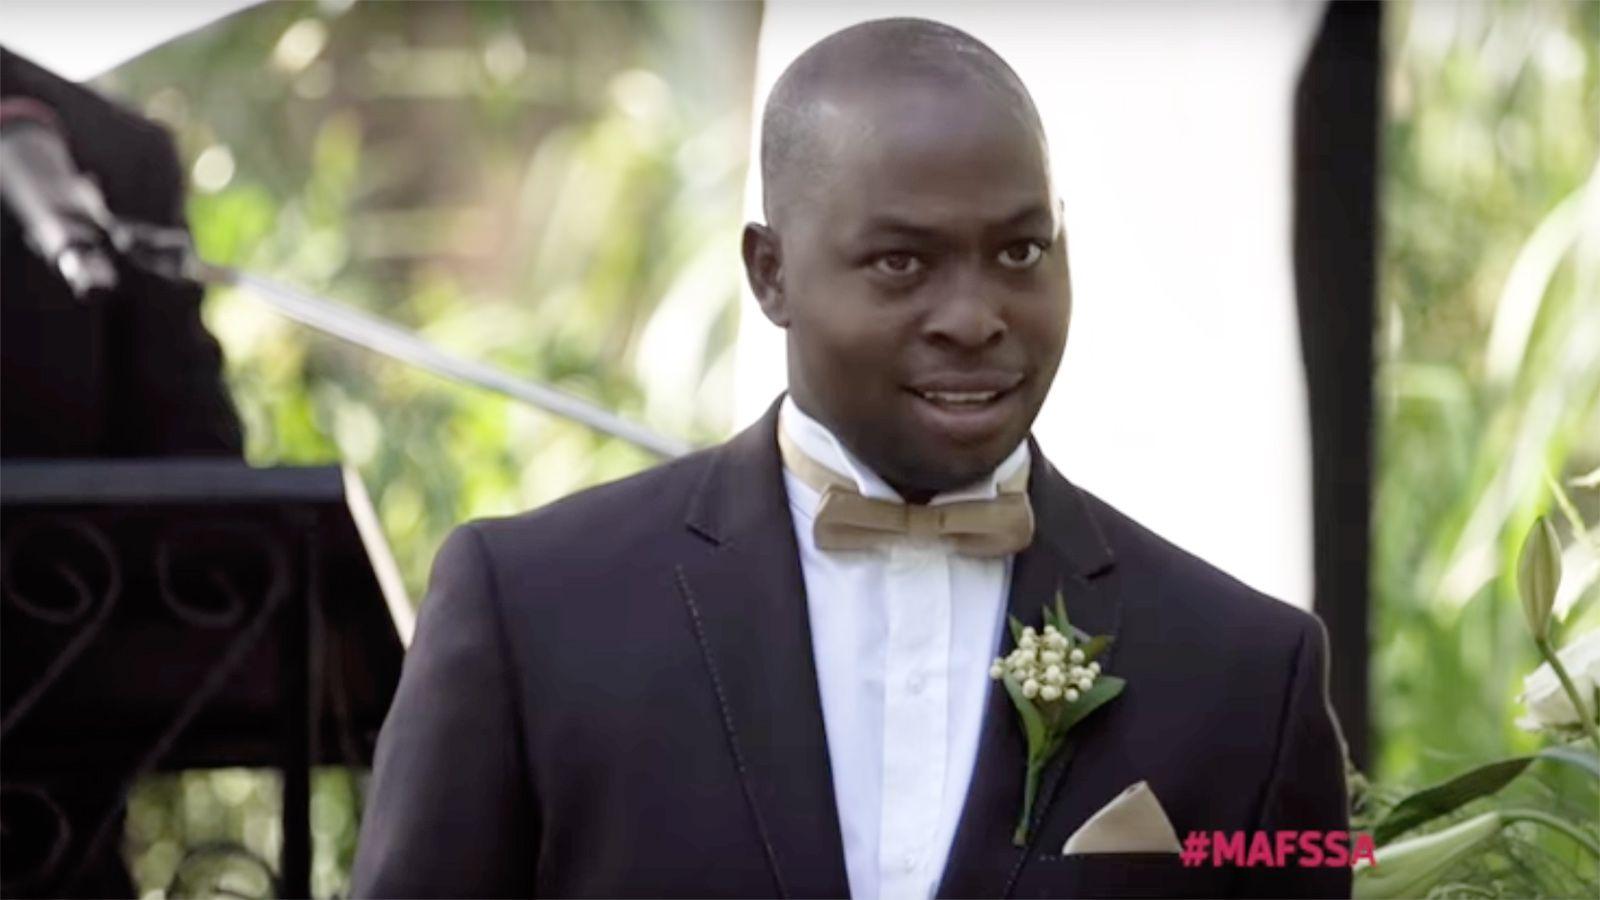 Married at First Sight SA season 2 will not include gay couples